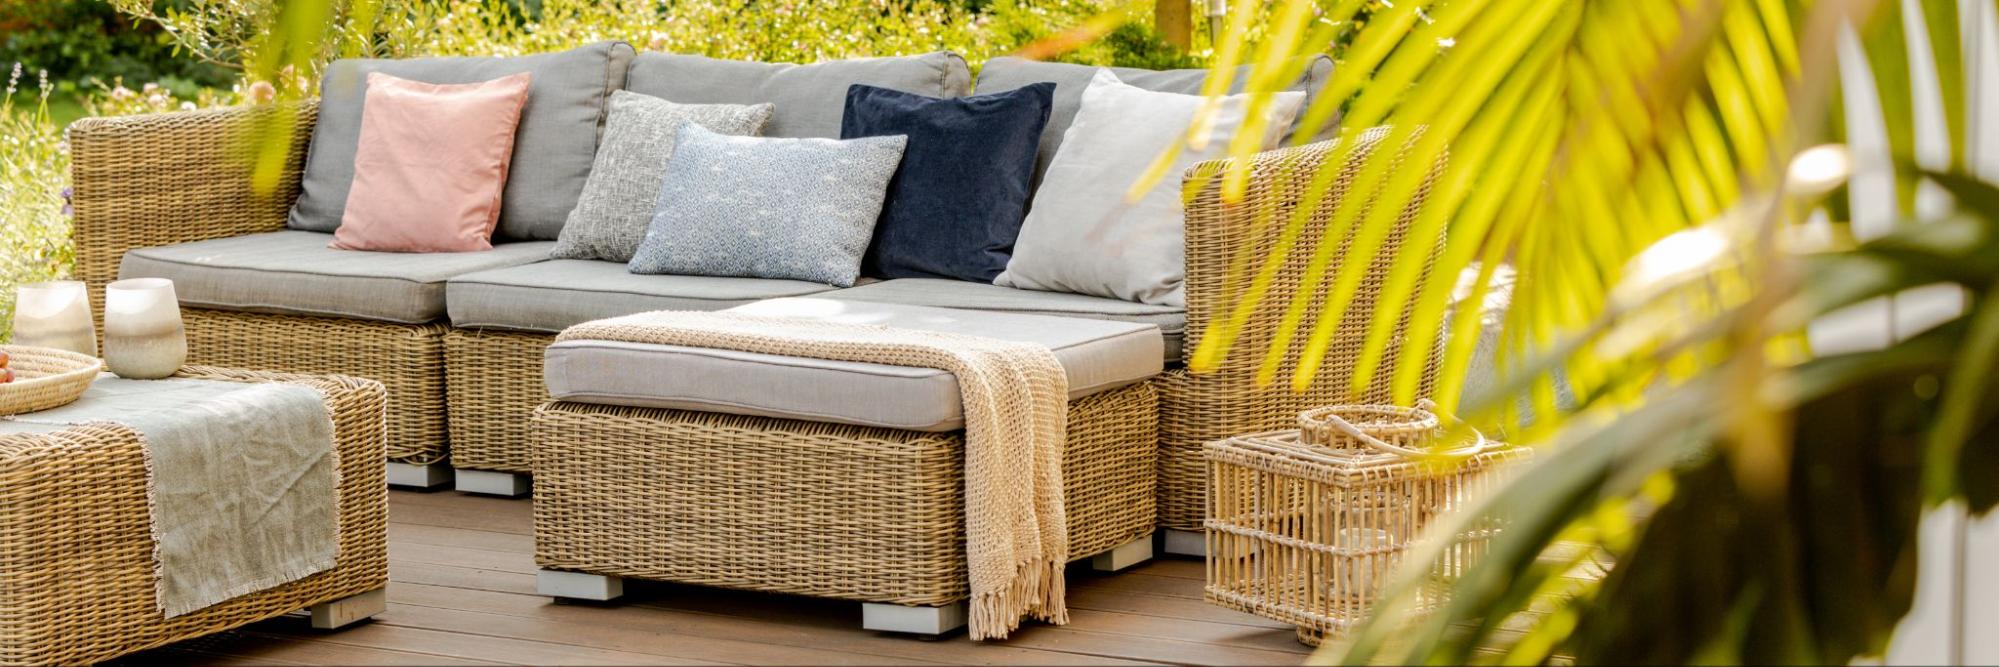 Surrounded by plants, a spacious terrace with cozy rattan furniture and a wooden floor creates a welcoming ambiance.